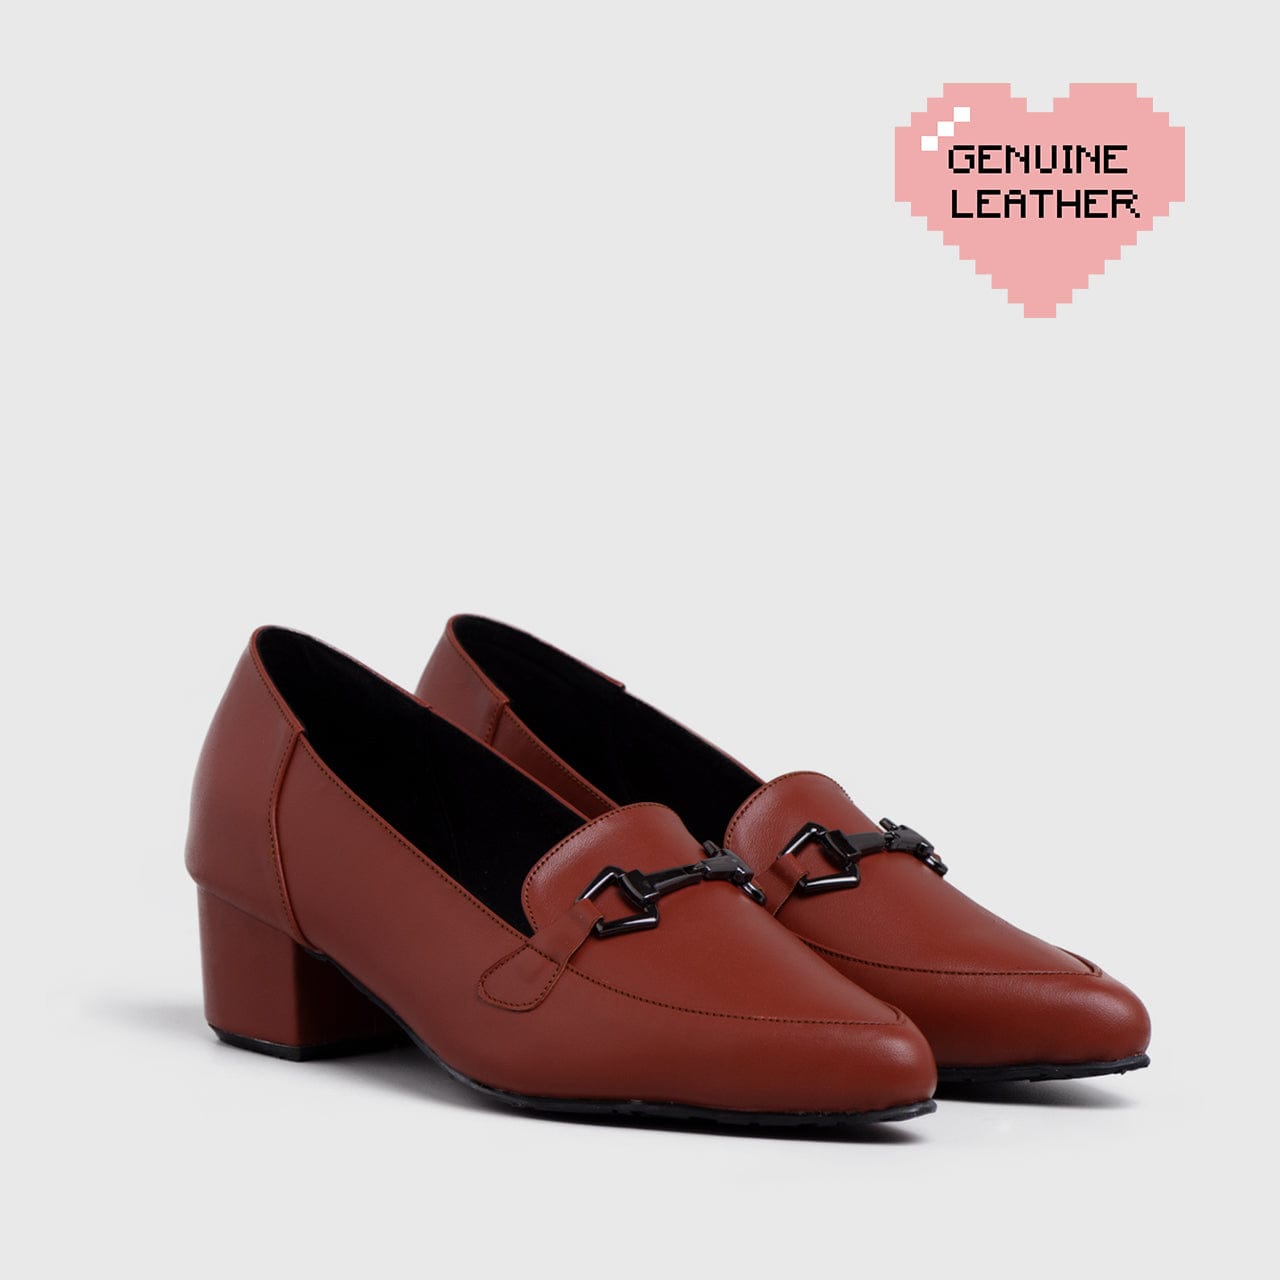 Adorable Projects Official Adorableprojects - Mulligan Heels Genuine Leather Terracotta